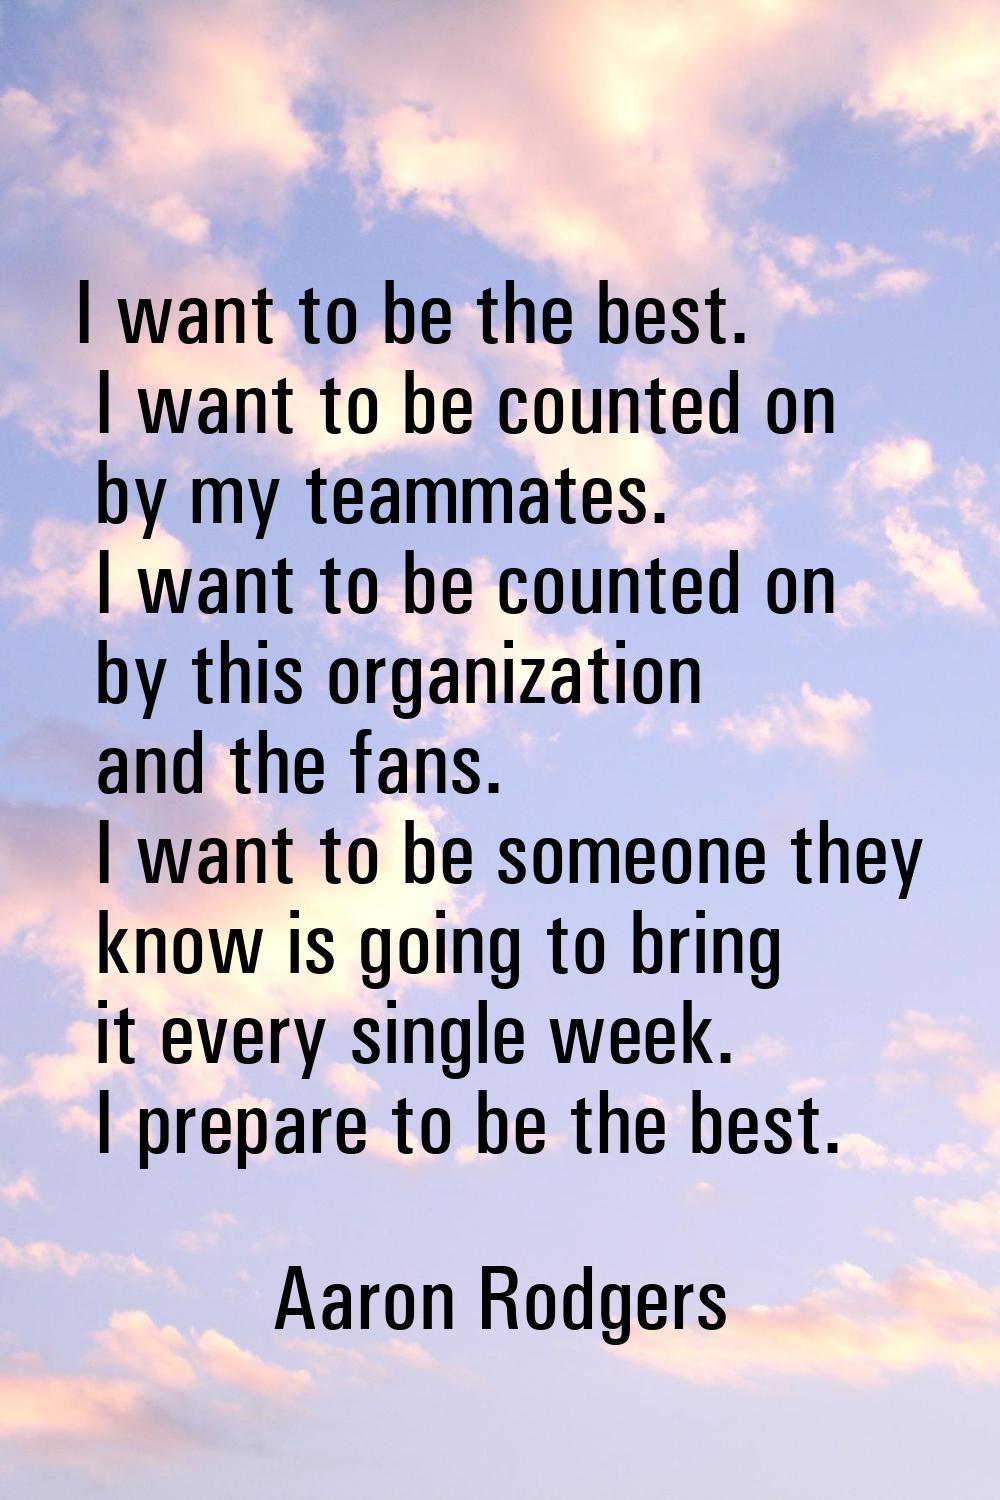 I want to be the best. I want to be counted on by my teammates. I want to be counted on by this org